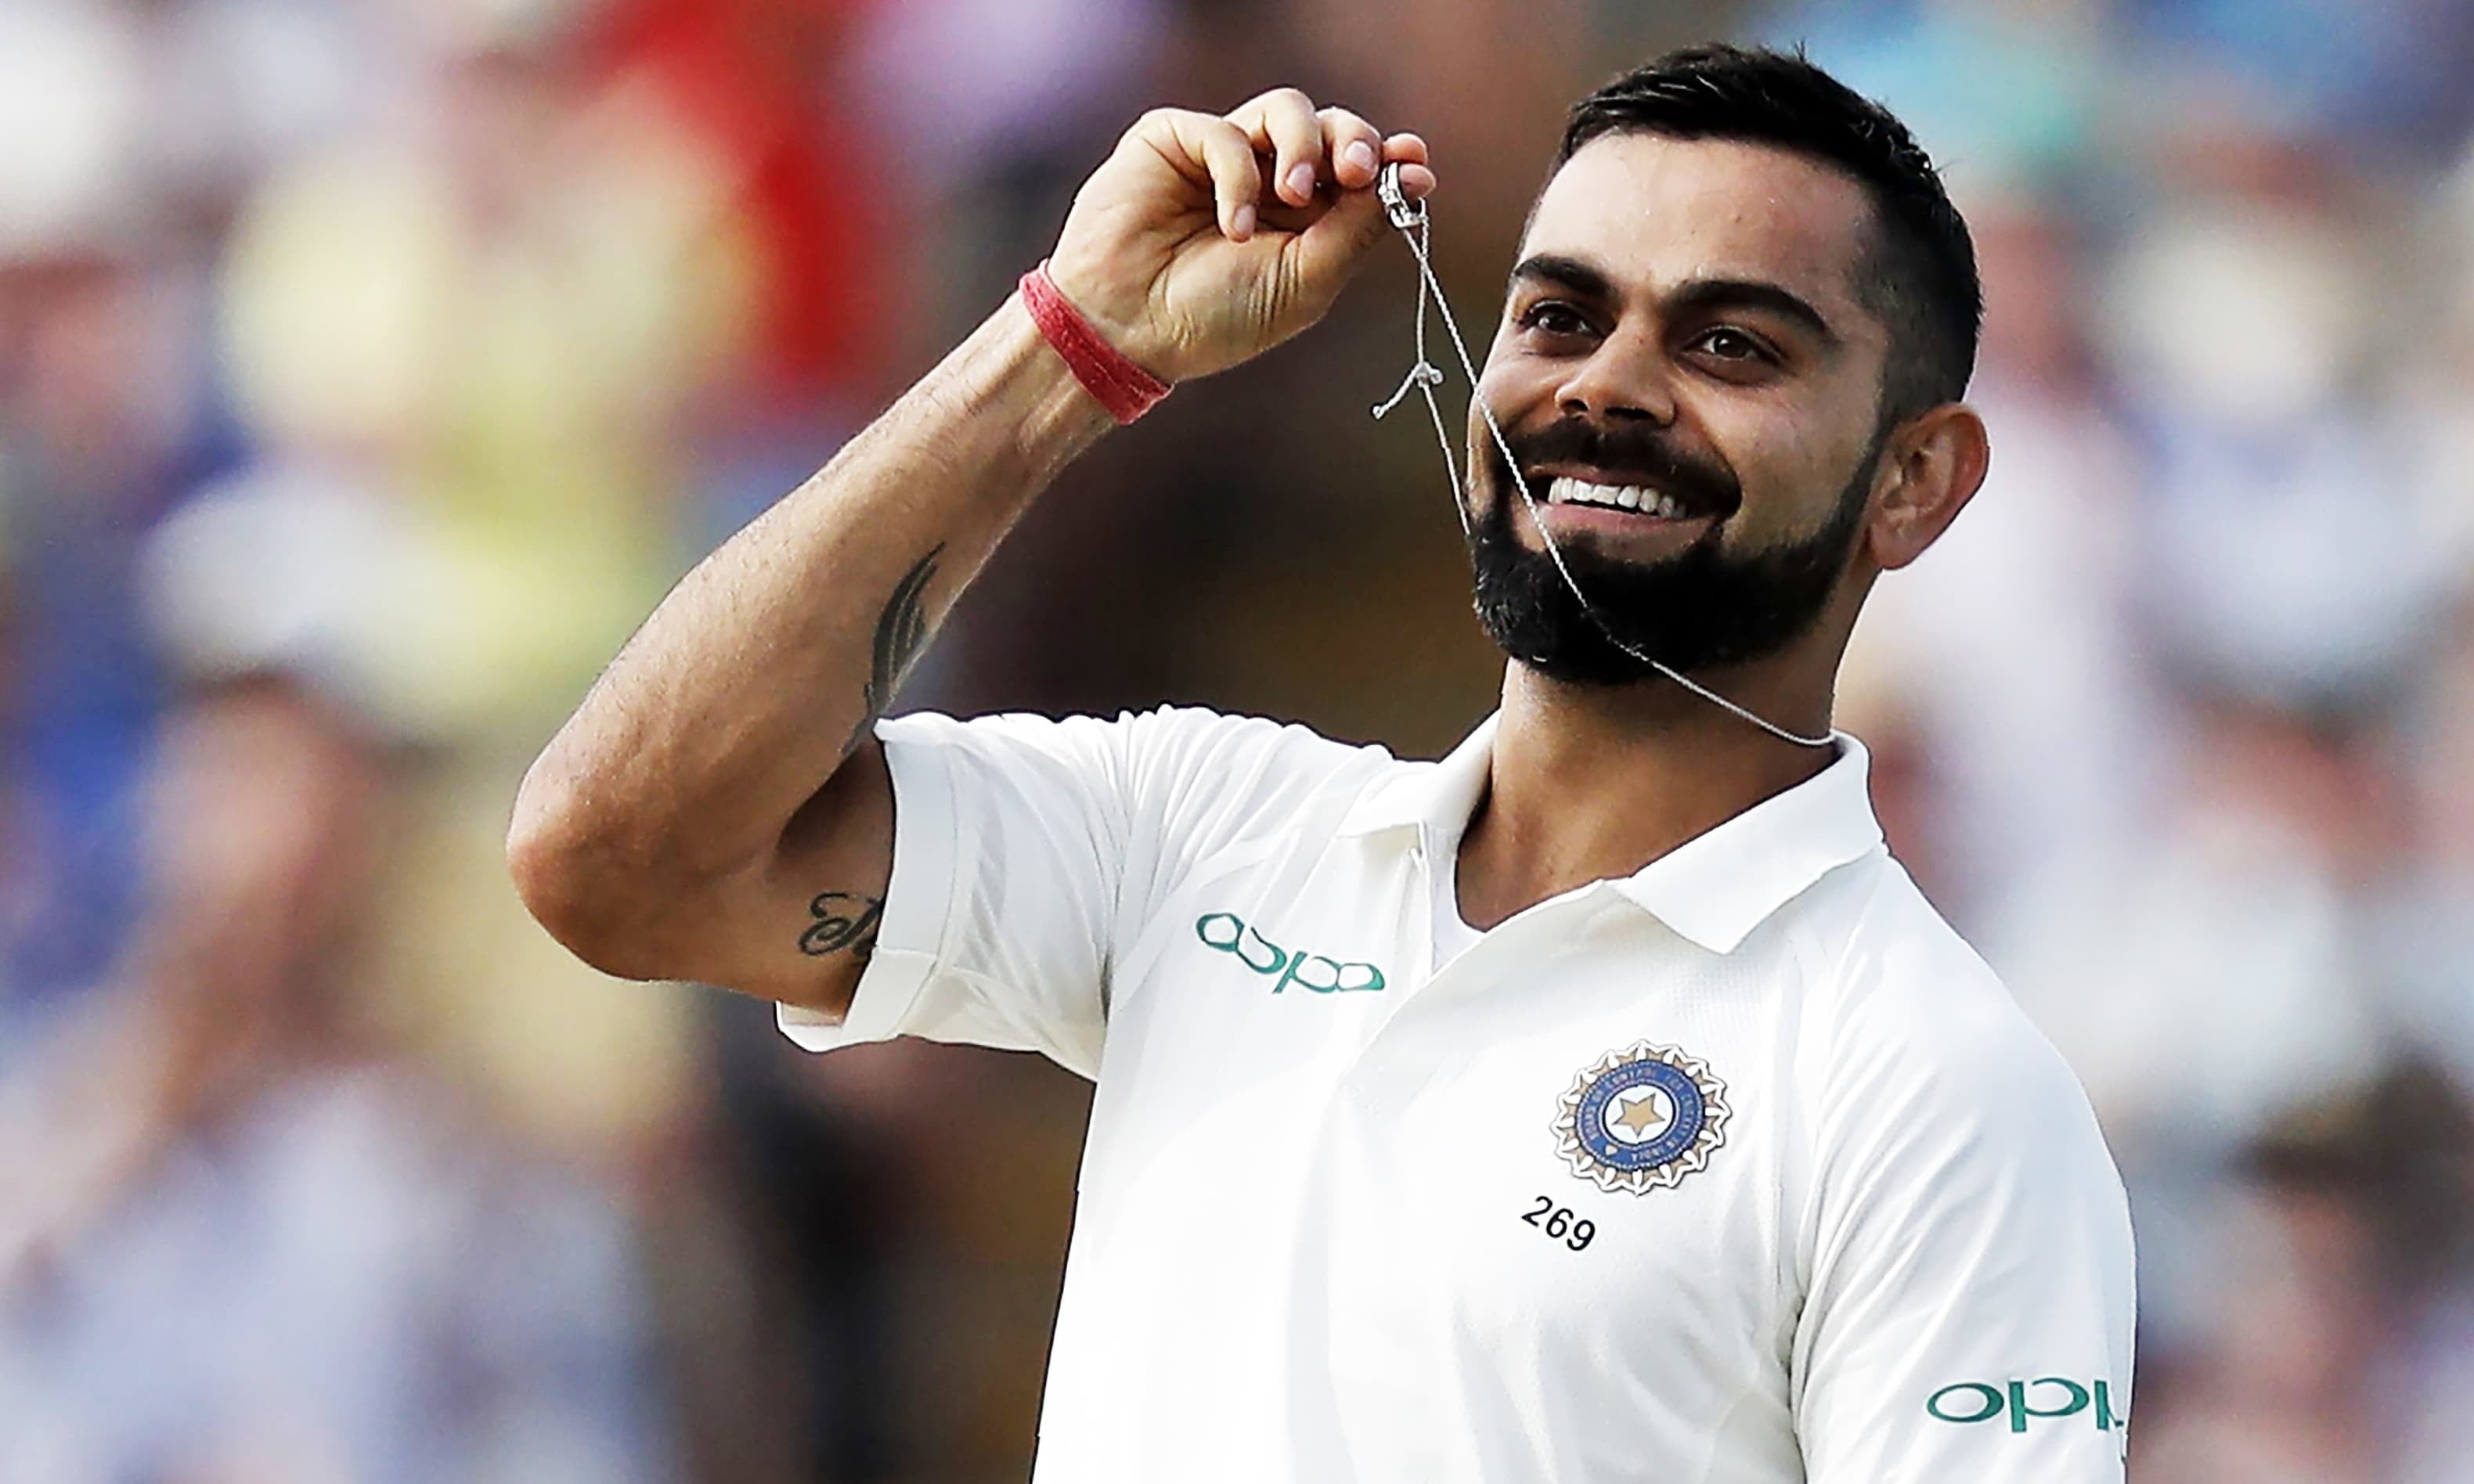 Virat Kohli Captaincy Record (Tests, ODIs, T20Is, and IPL) – A Statistical Analysis